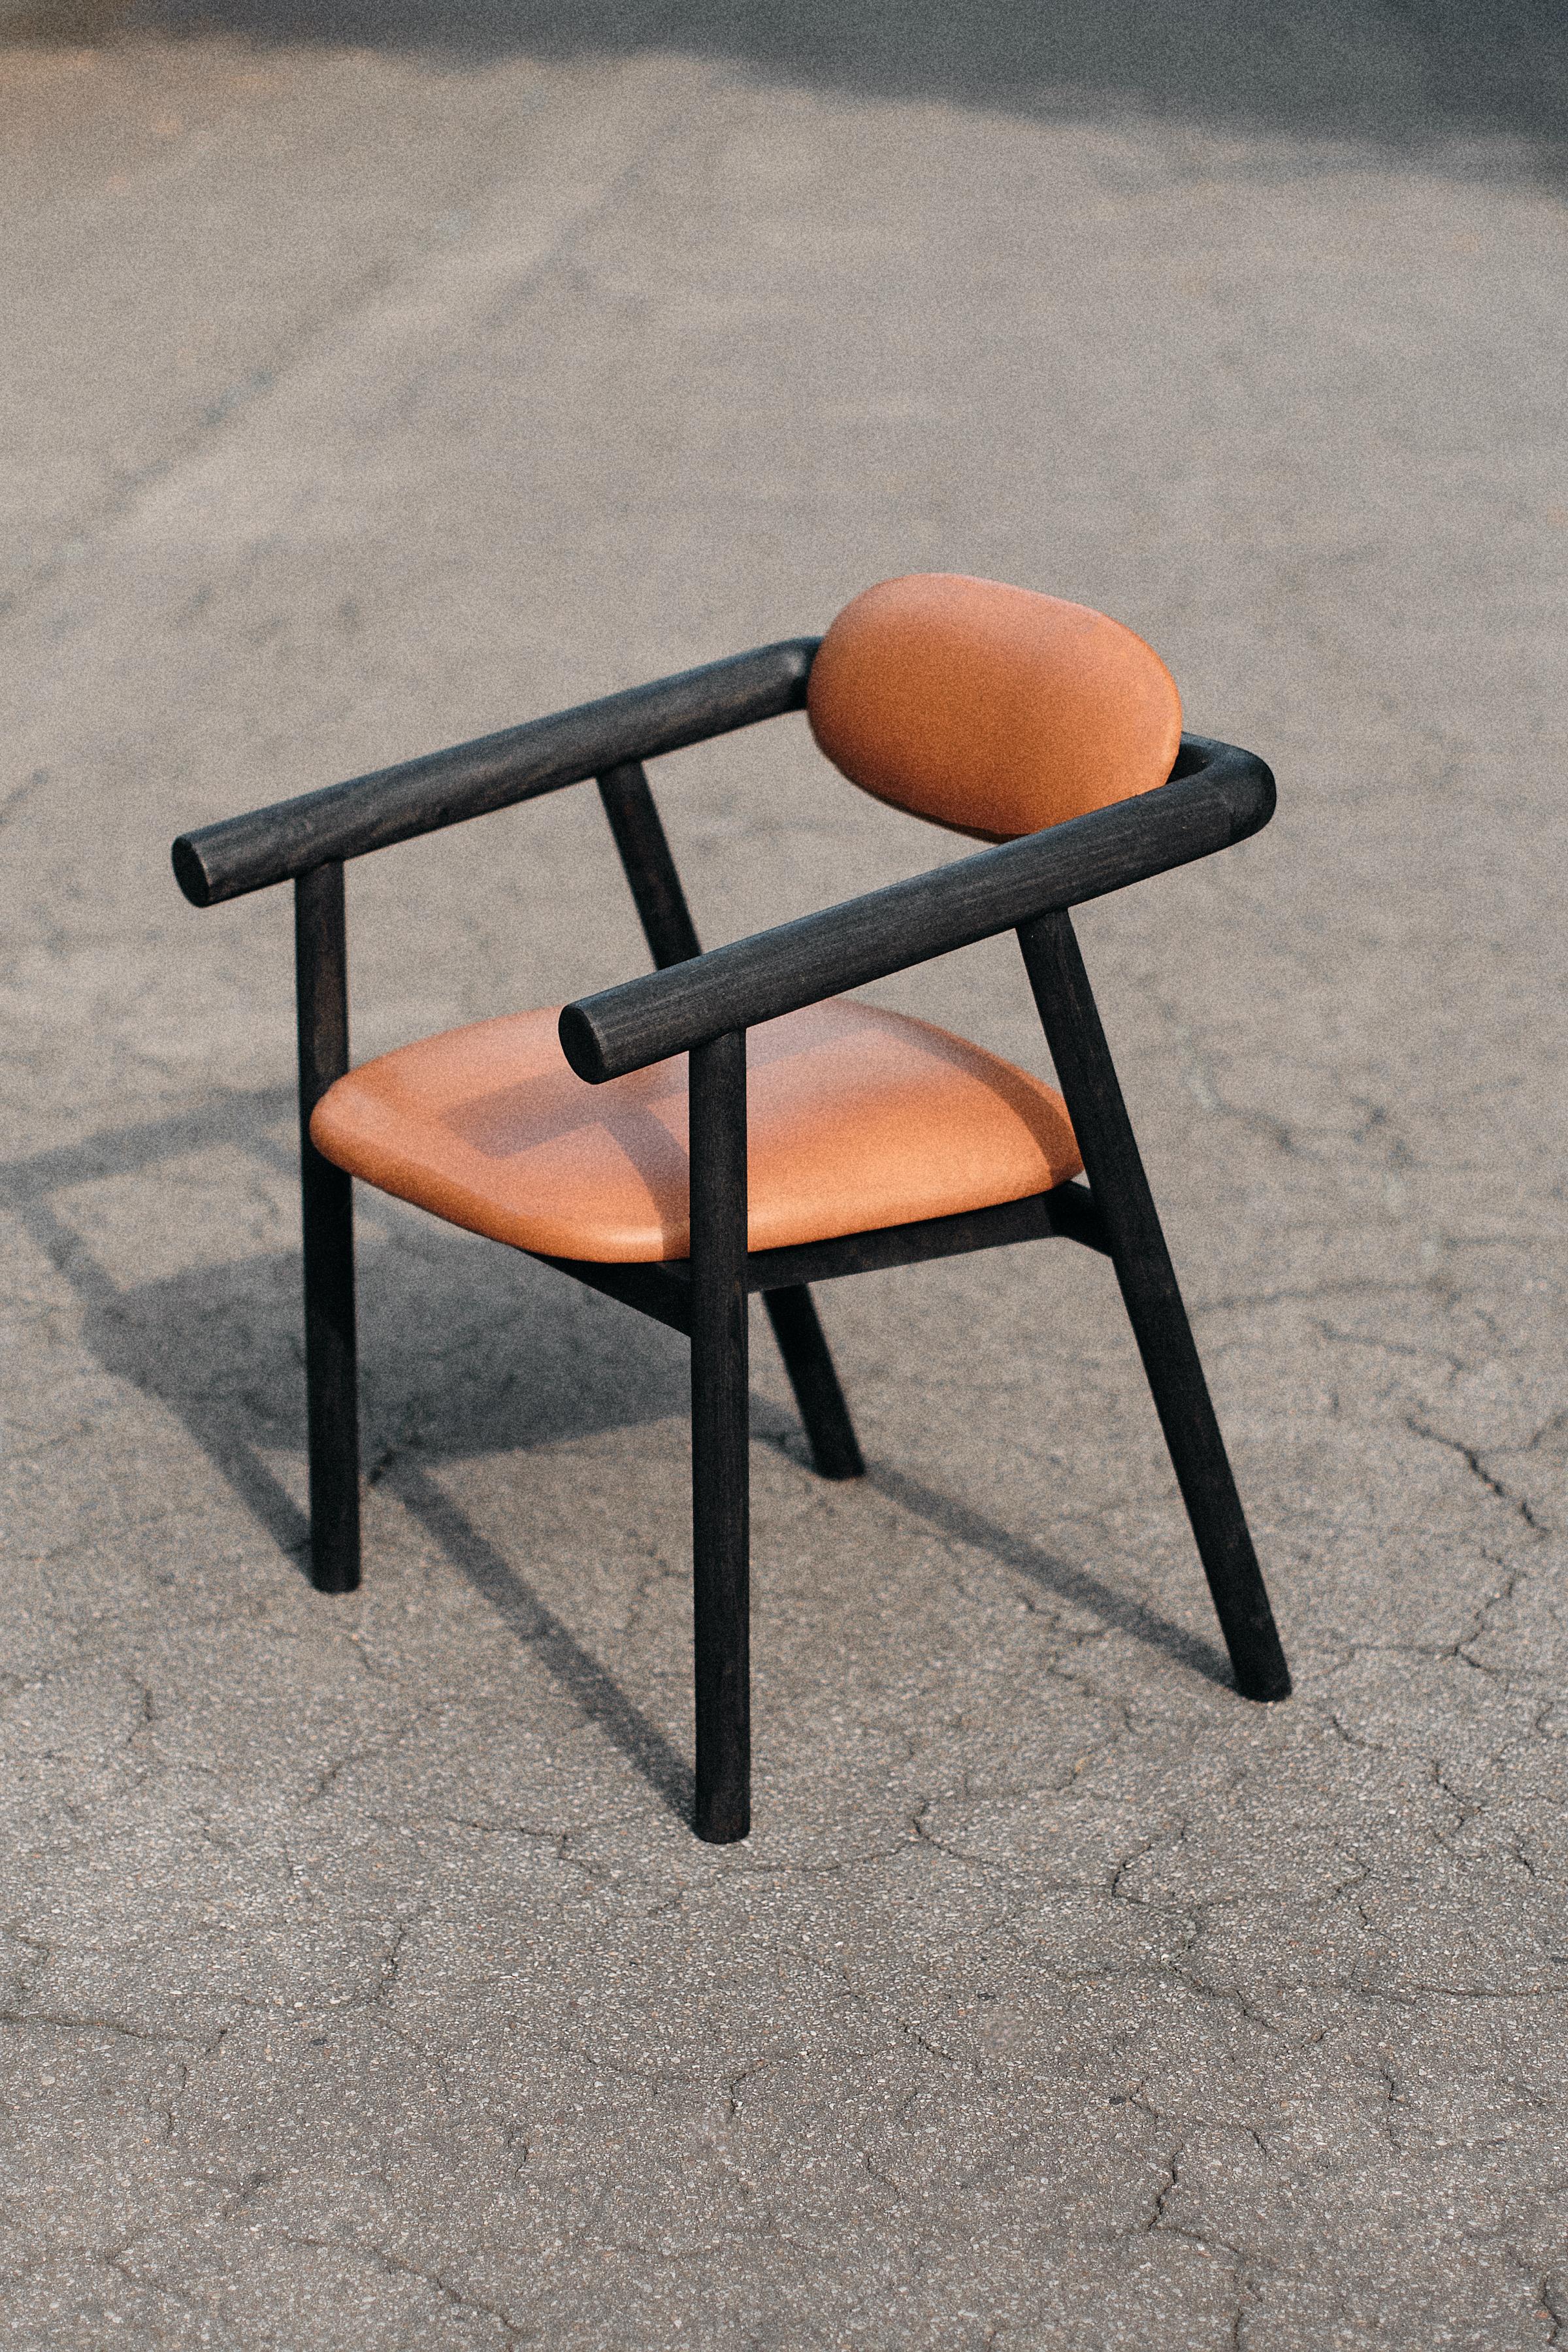 Dining chair Doro by Camilo Andres Rodriguez Marquez (aka CarmWorks)

Solid oak or cedar / Burnt wood or natural

Each piece is made to order and hand crafted by the artist.

--
Camilo Andres Rodriguez Marquez is a Colombian born designer